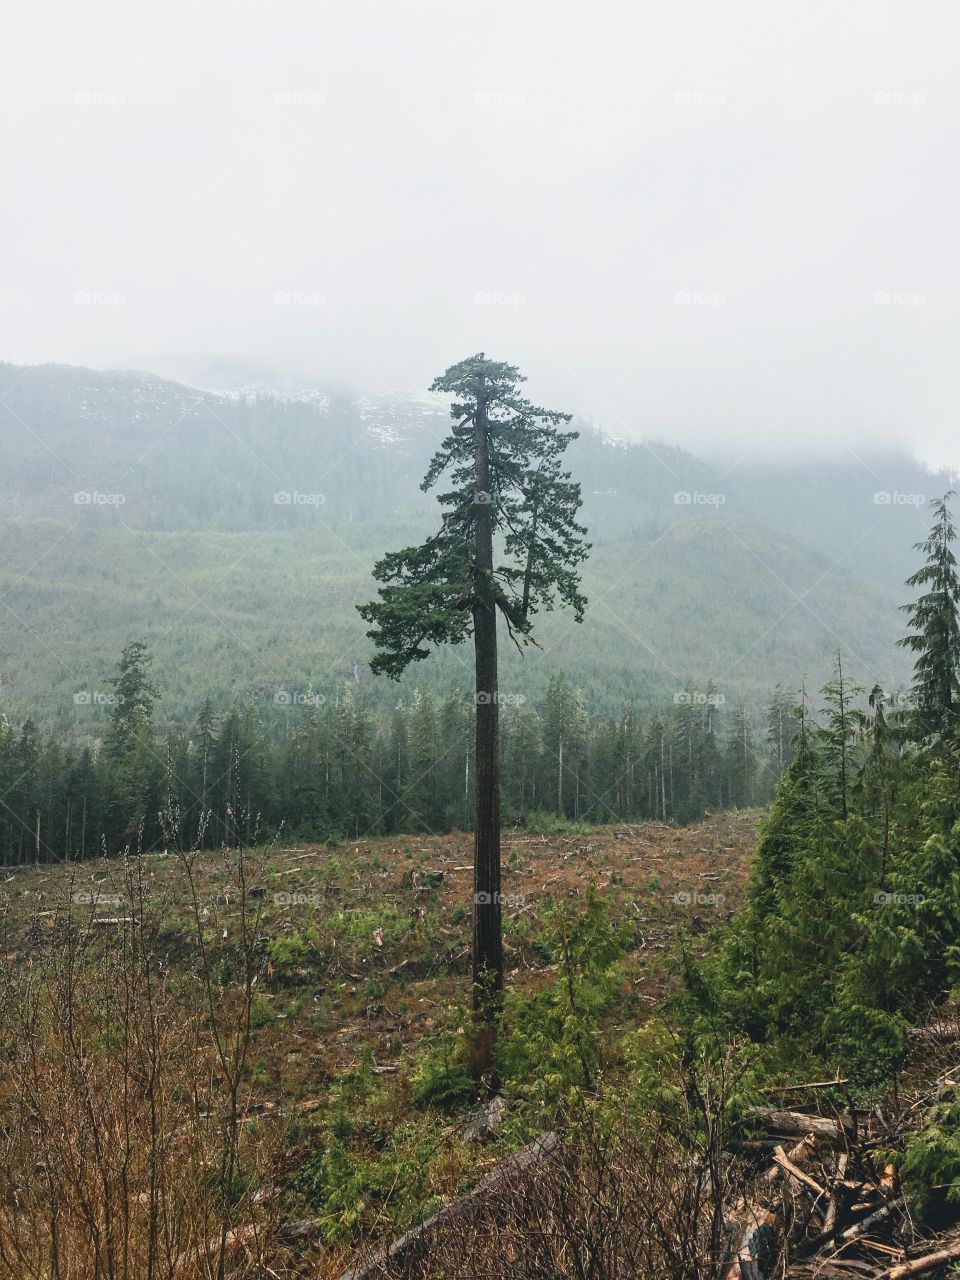 Big Lonely Doug is a gargantuan, old-growth Douglas-fir tree standing alone in a recent logging clearcut near Port Renfrew.  Lonely Doug is a tree with a trunk as wide as a living room and stands taller than a downtown skyscraper.  Doug’s total size comes in just behind the current champion Douglas-fir, the Red Creek Fir, the world’s largest, which grows just one valley over.